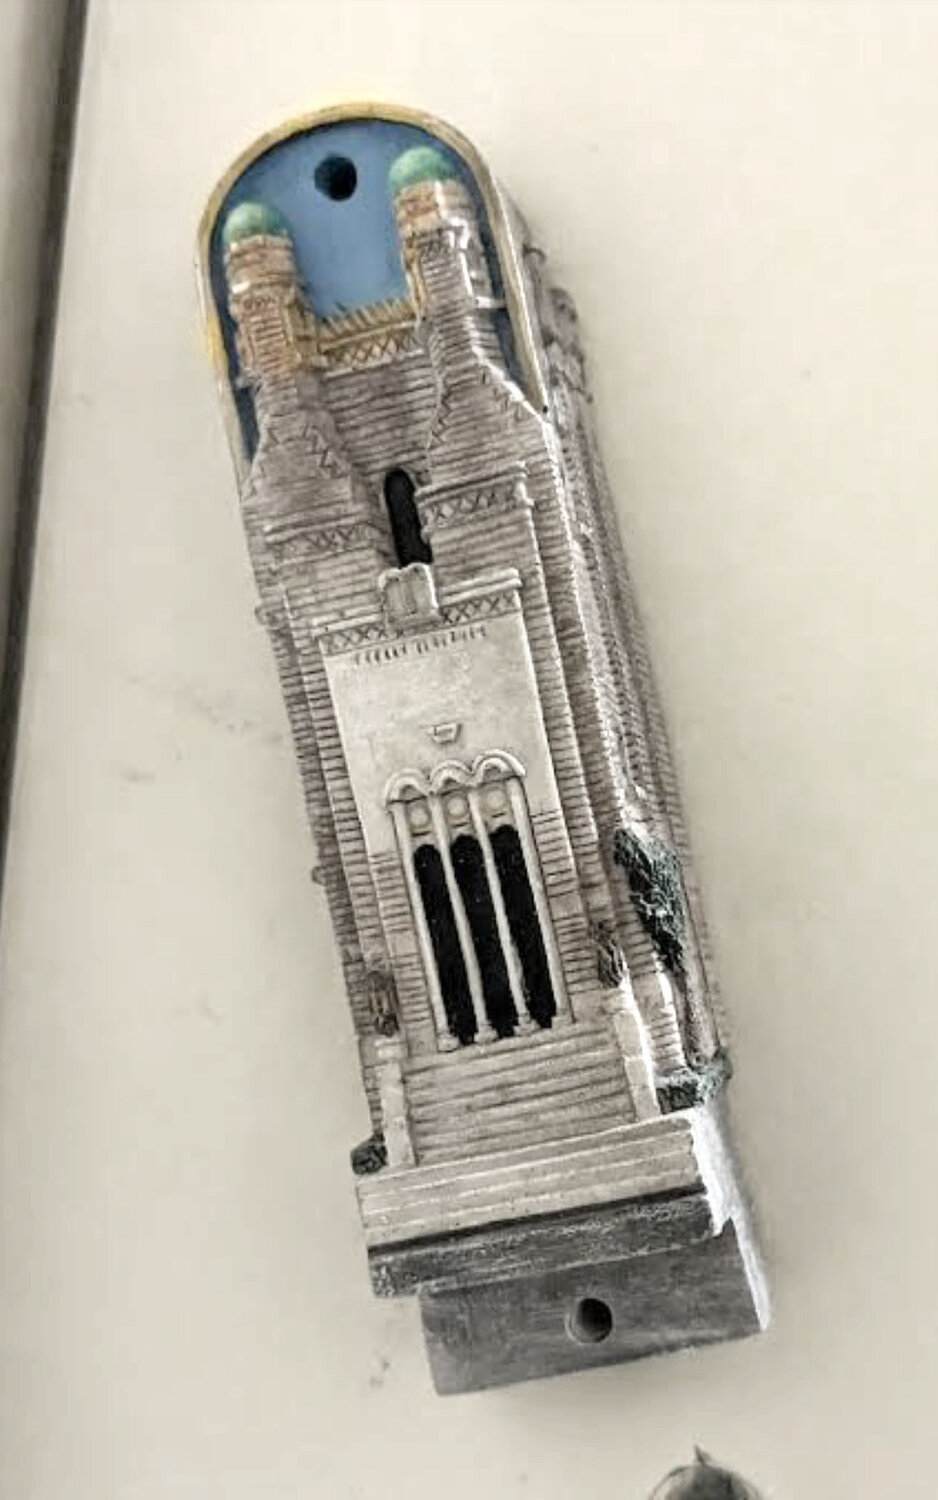 This mezuzah is mentioned in the closing passage of the article.